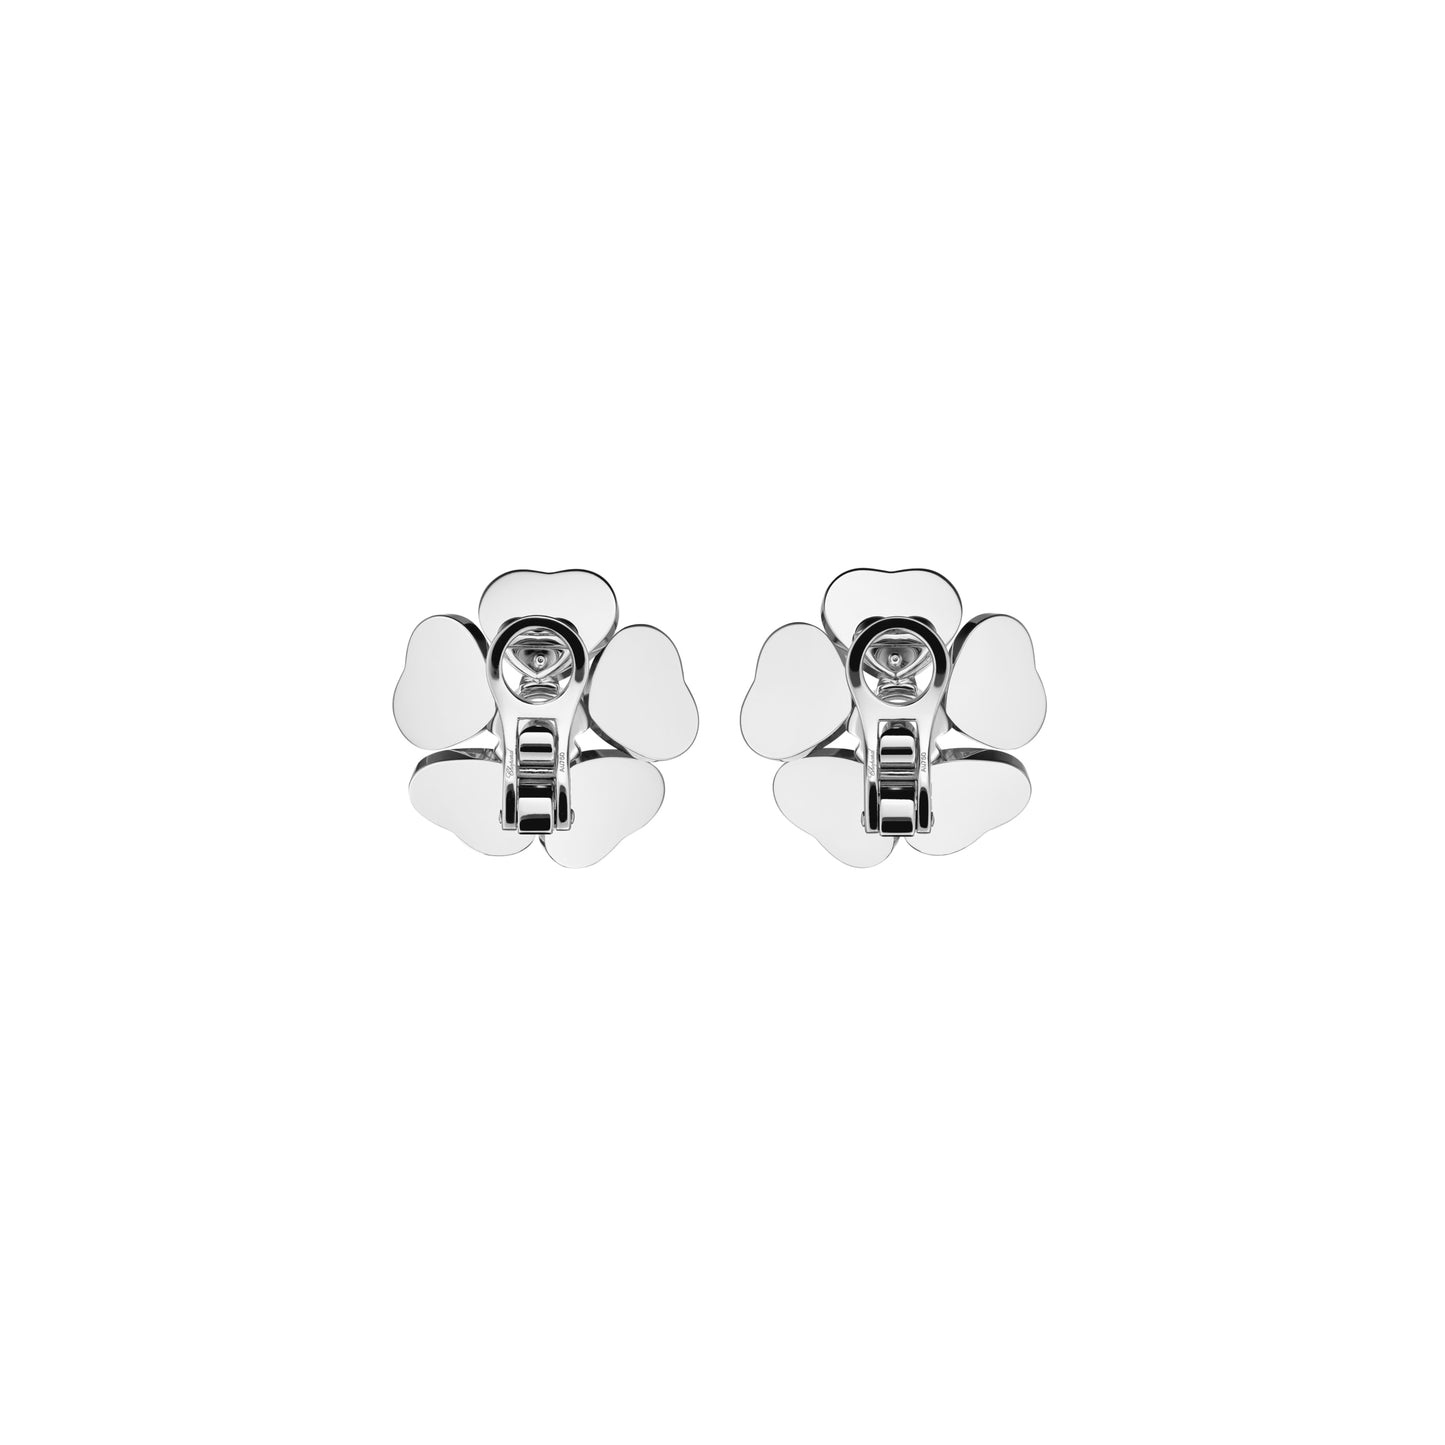 HAPPY HEARTS FLOWERS EARRINGS, ETHICAL WHITE GOLD, DIAMONDS 84A085-1901